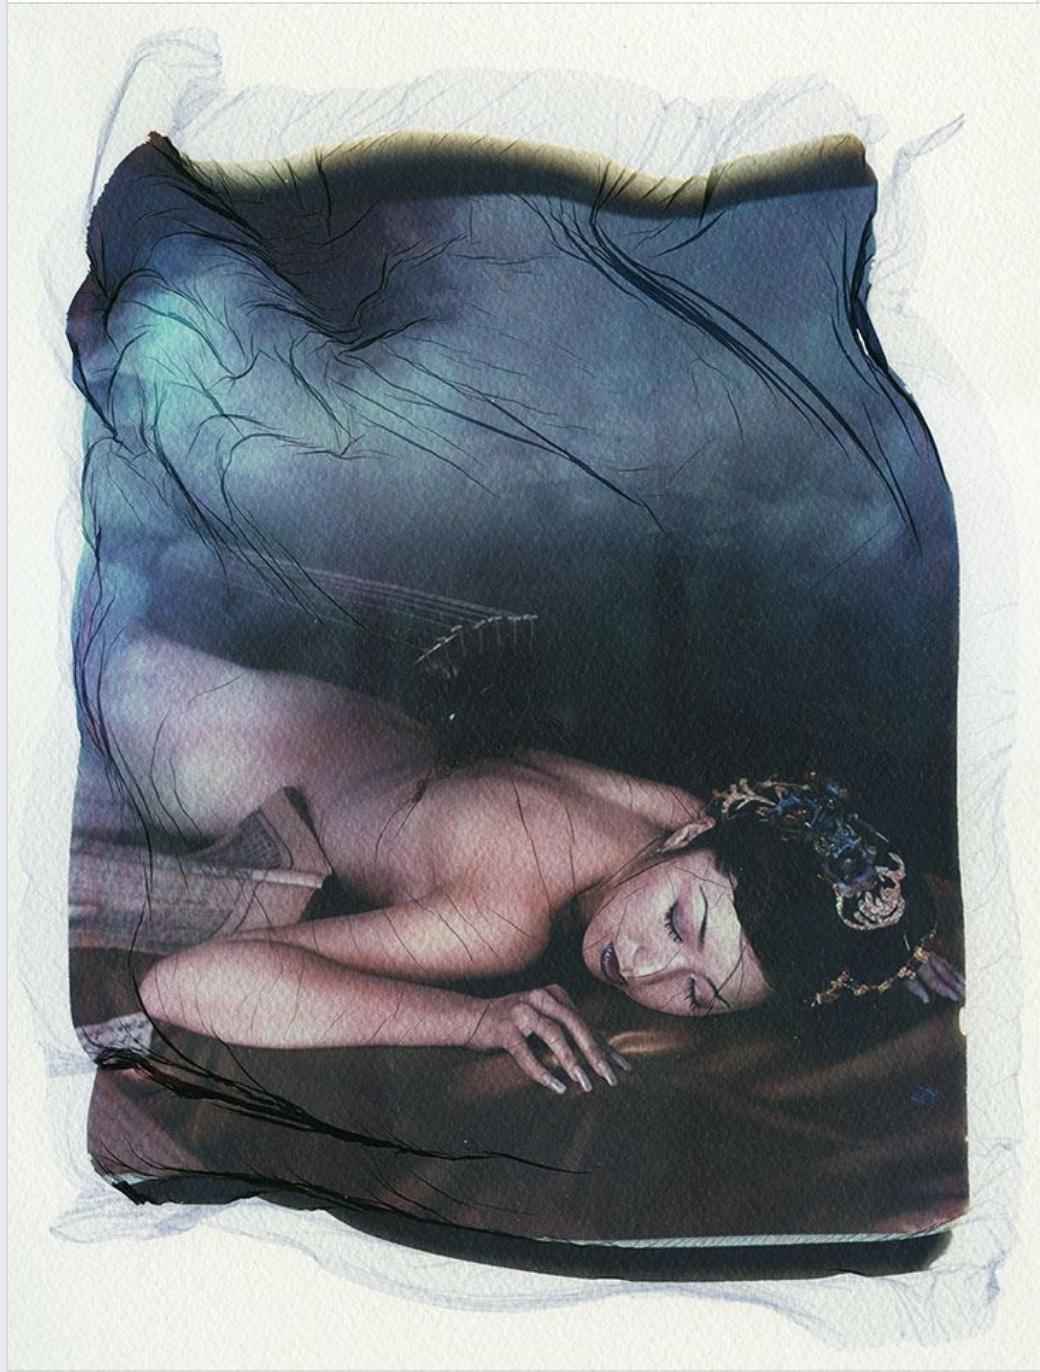 xulong zhang Color Photograph - Untitled, Polaroid Emulsion Transfer, Contemporary, 21st Century, Nude